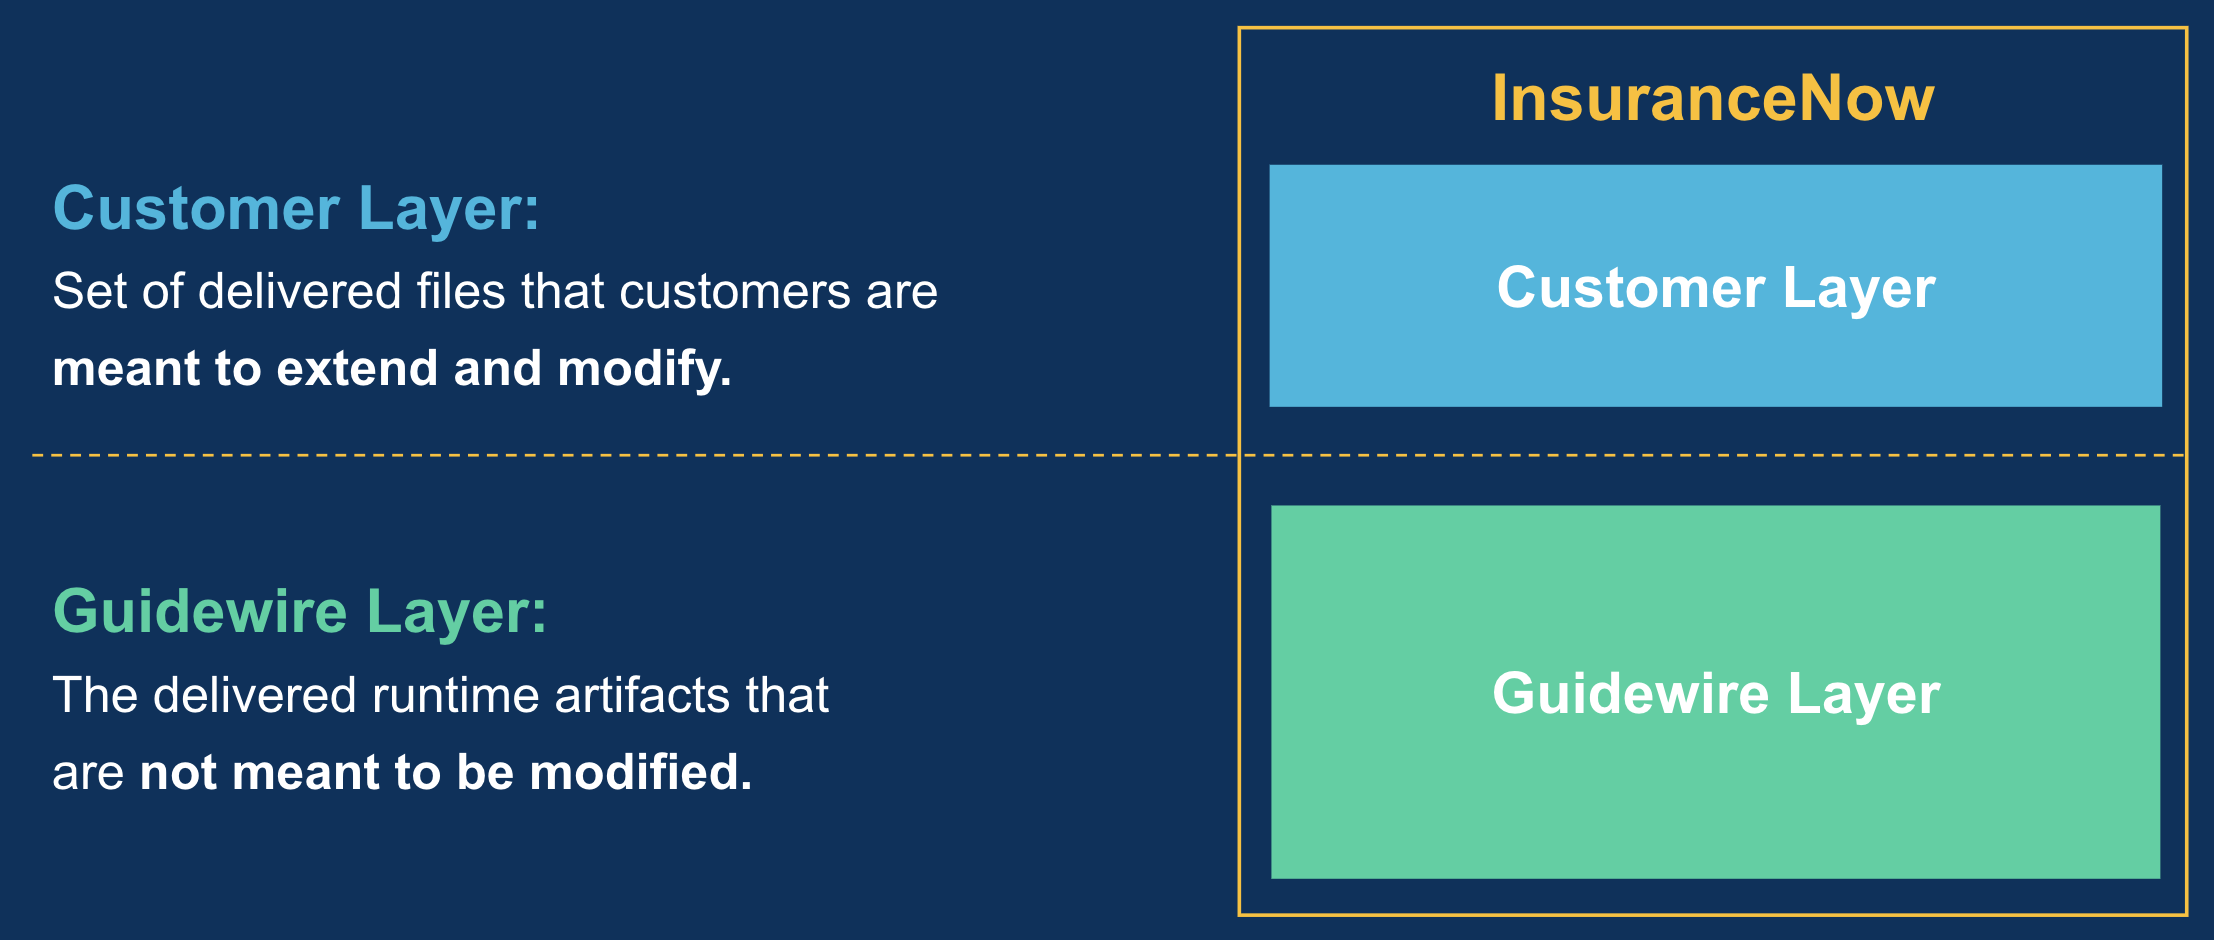 InsuranceNow Innovations - Customer and Guidewire Layers